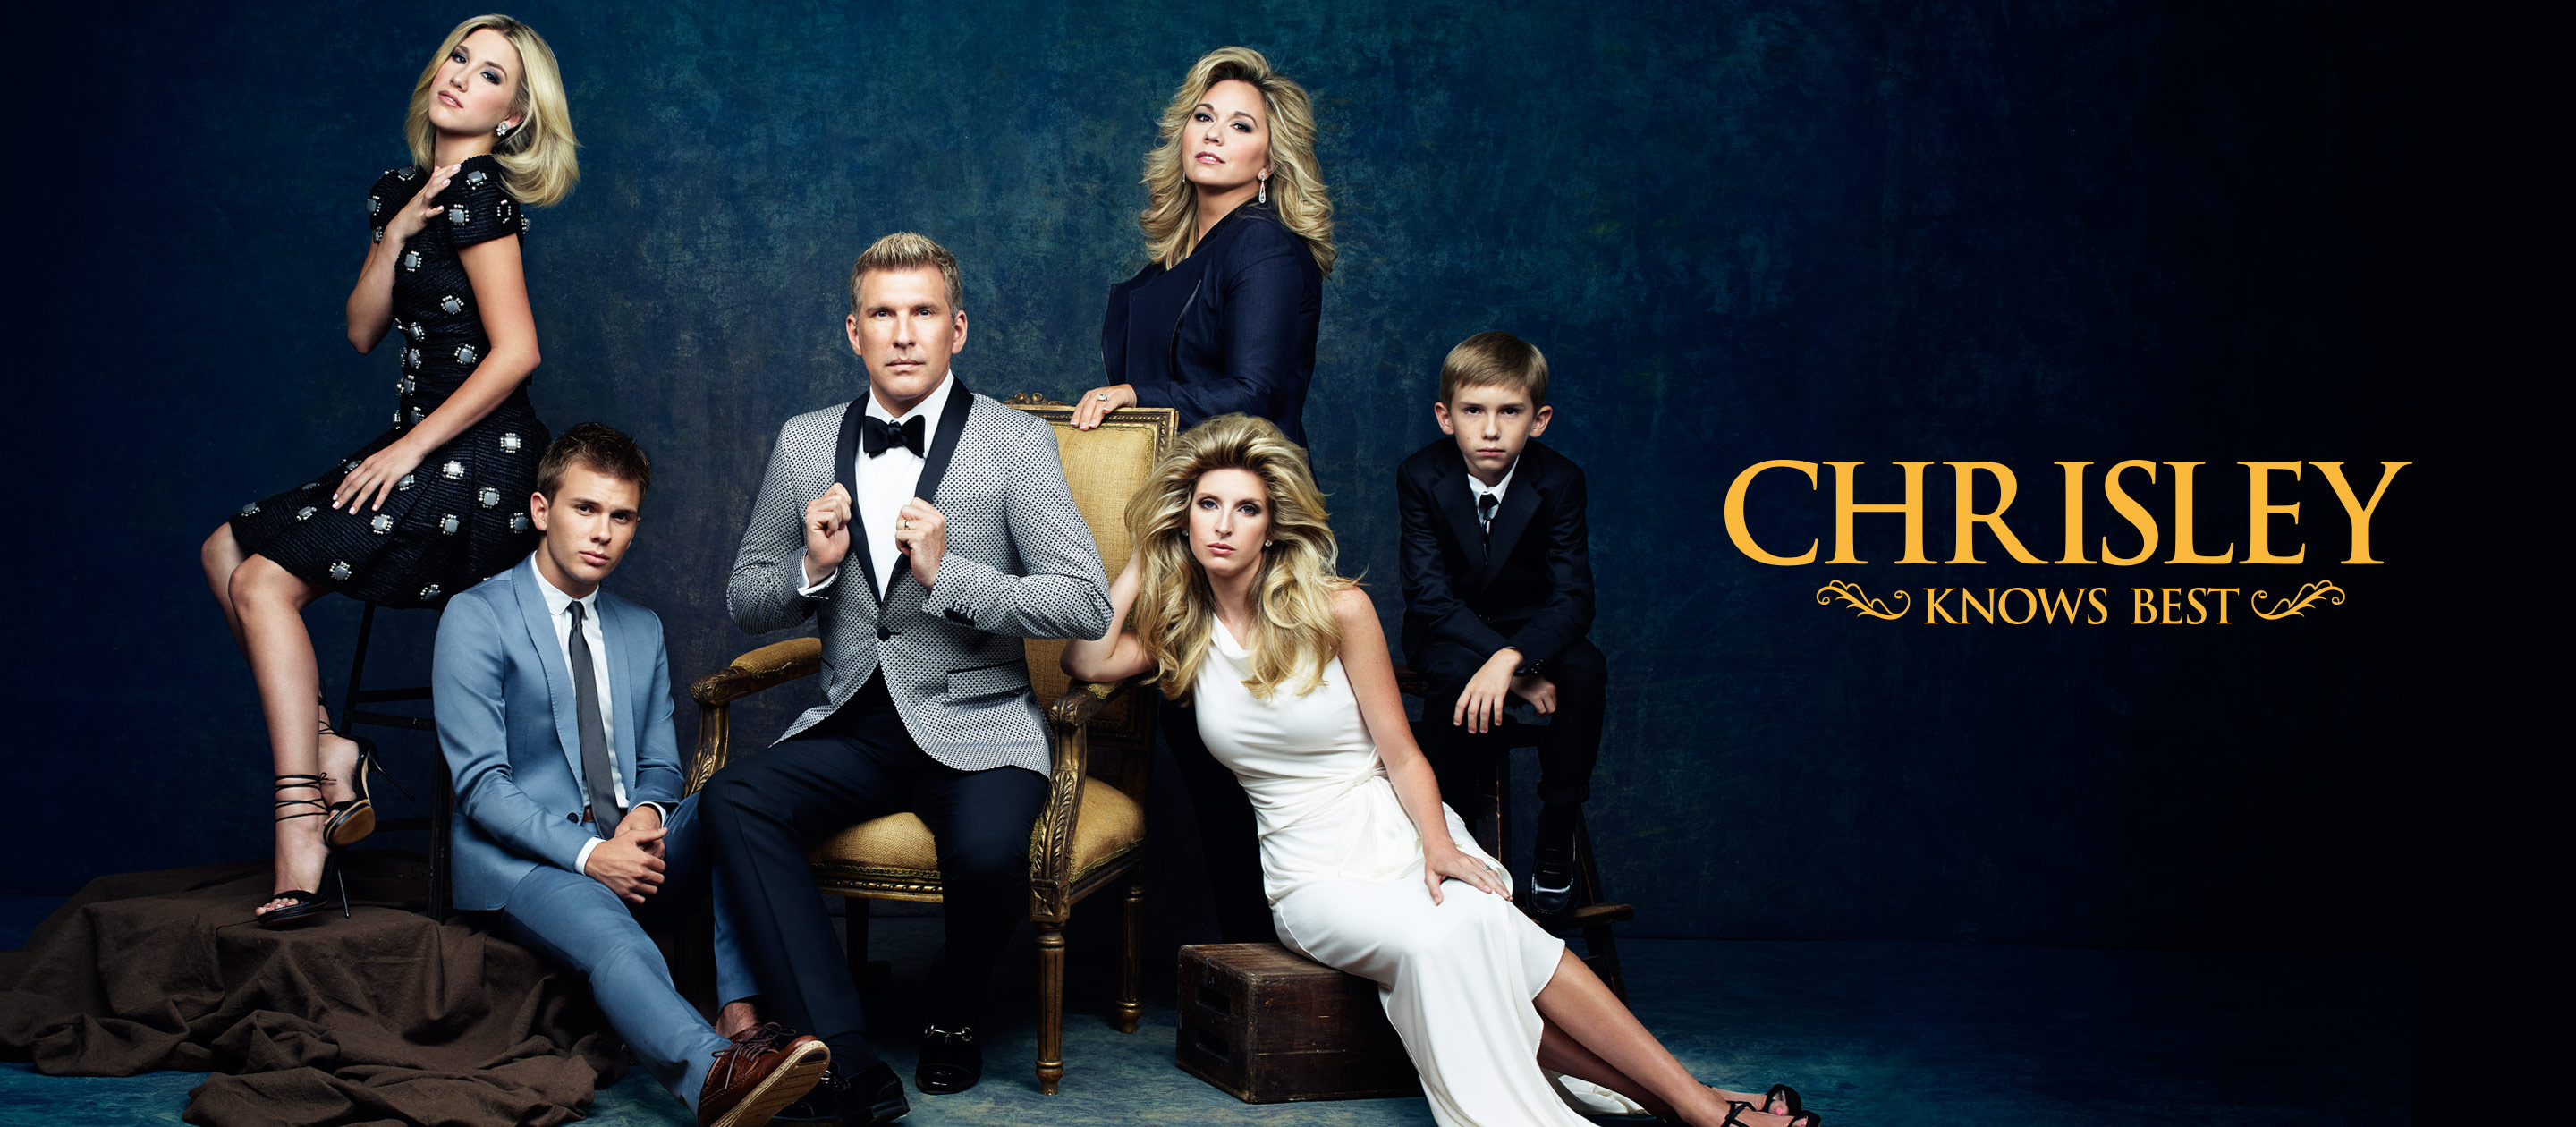 HQ Chrisley Knows Best Wallpapers | File 838.79Kb